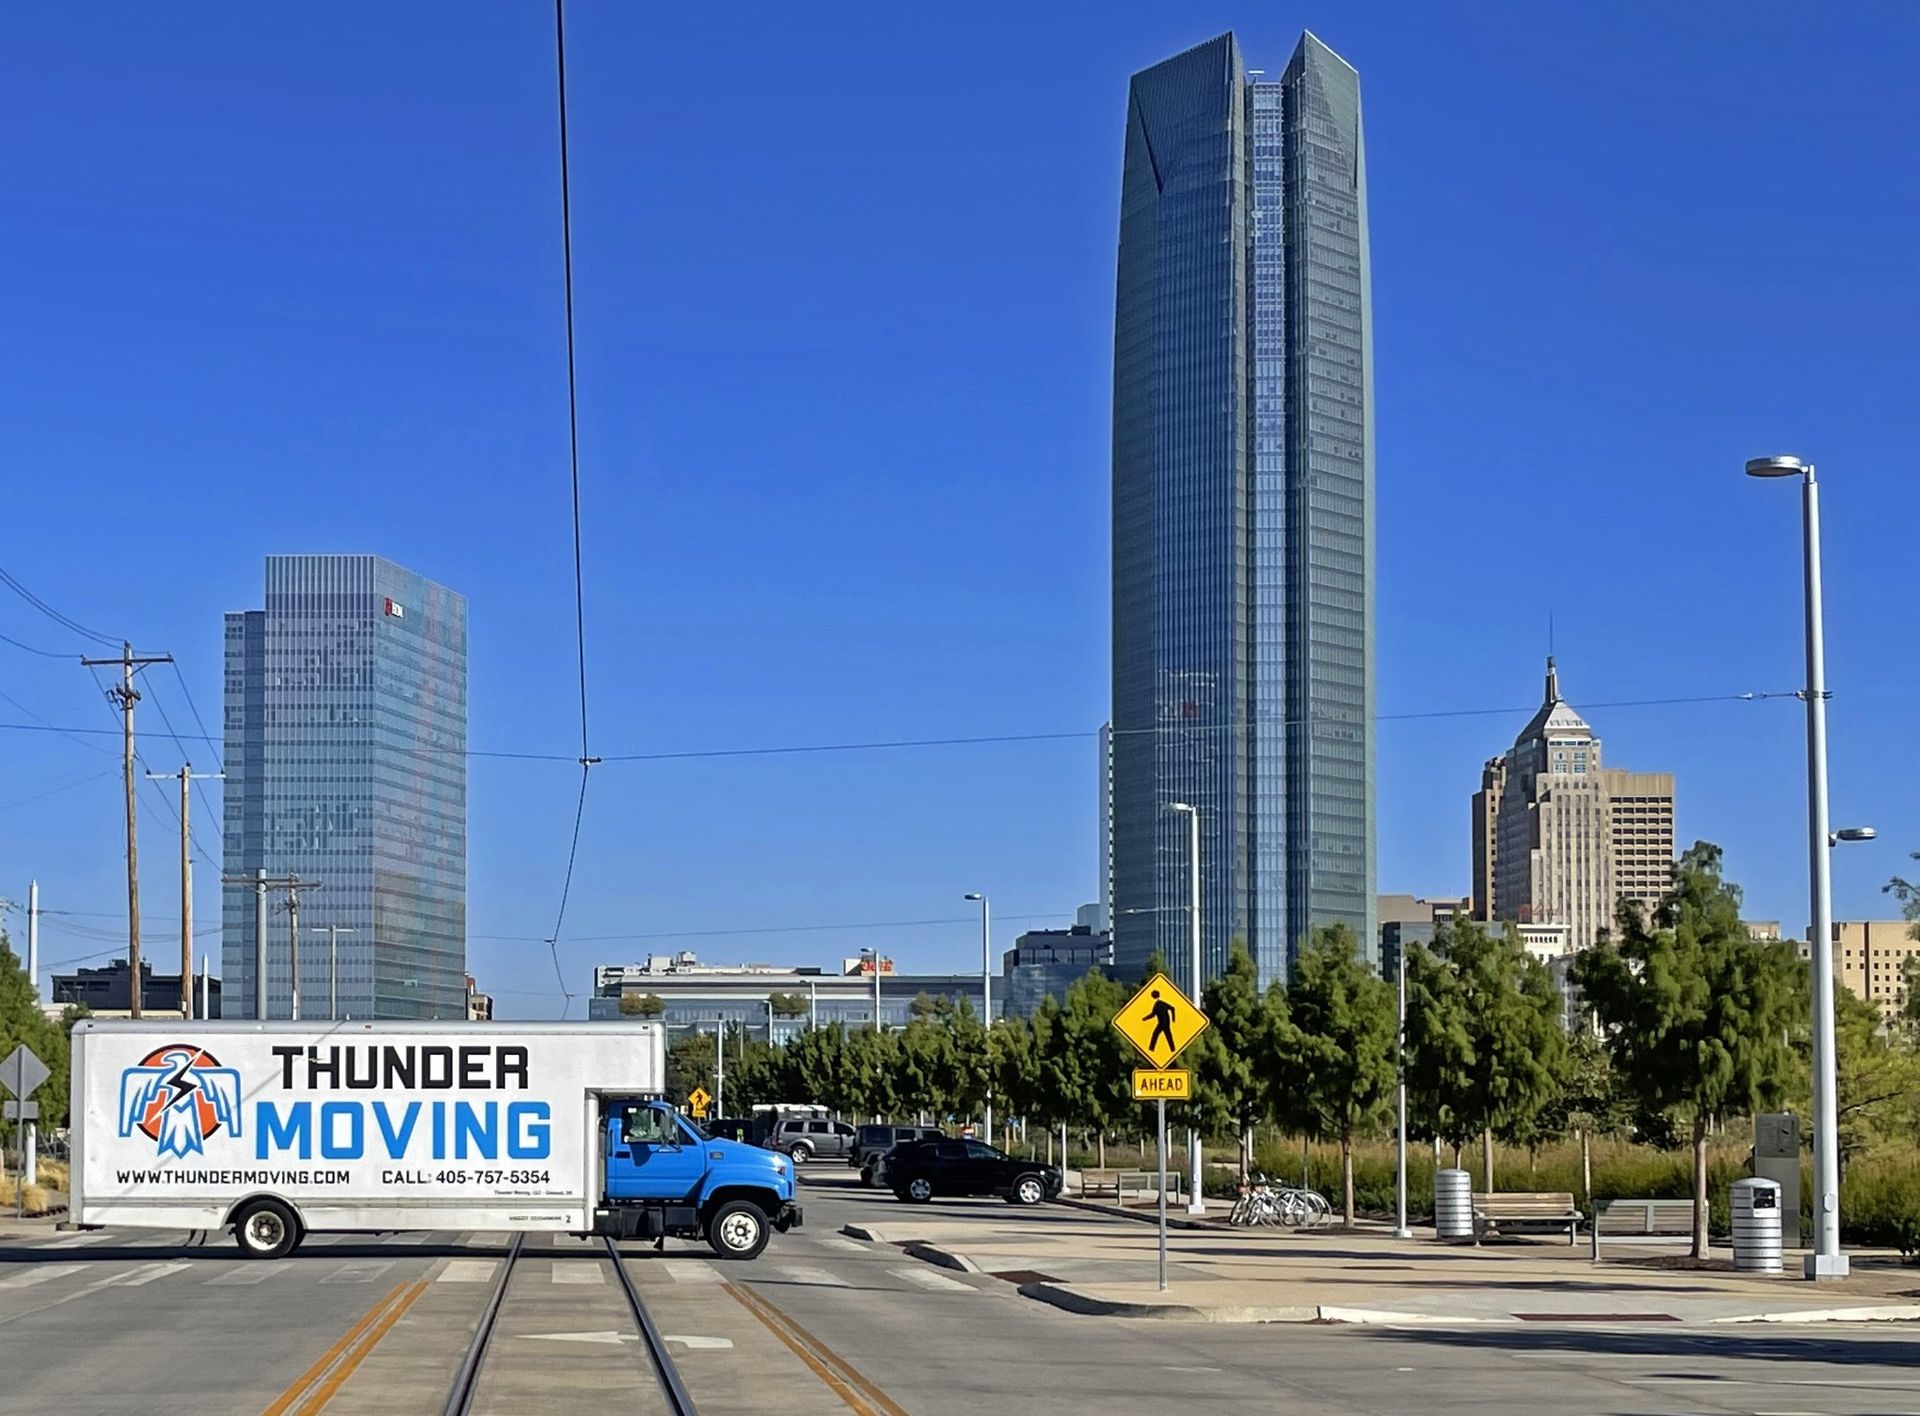 A Thunder Moving truck in downtown Oklahoma City, near Scissortail Park.